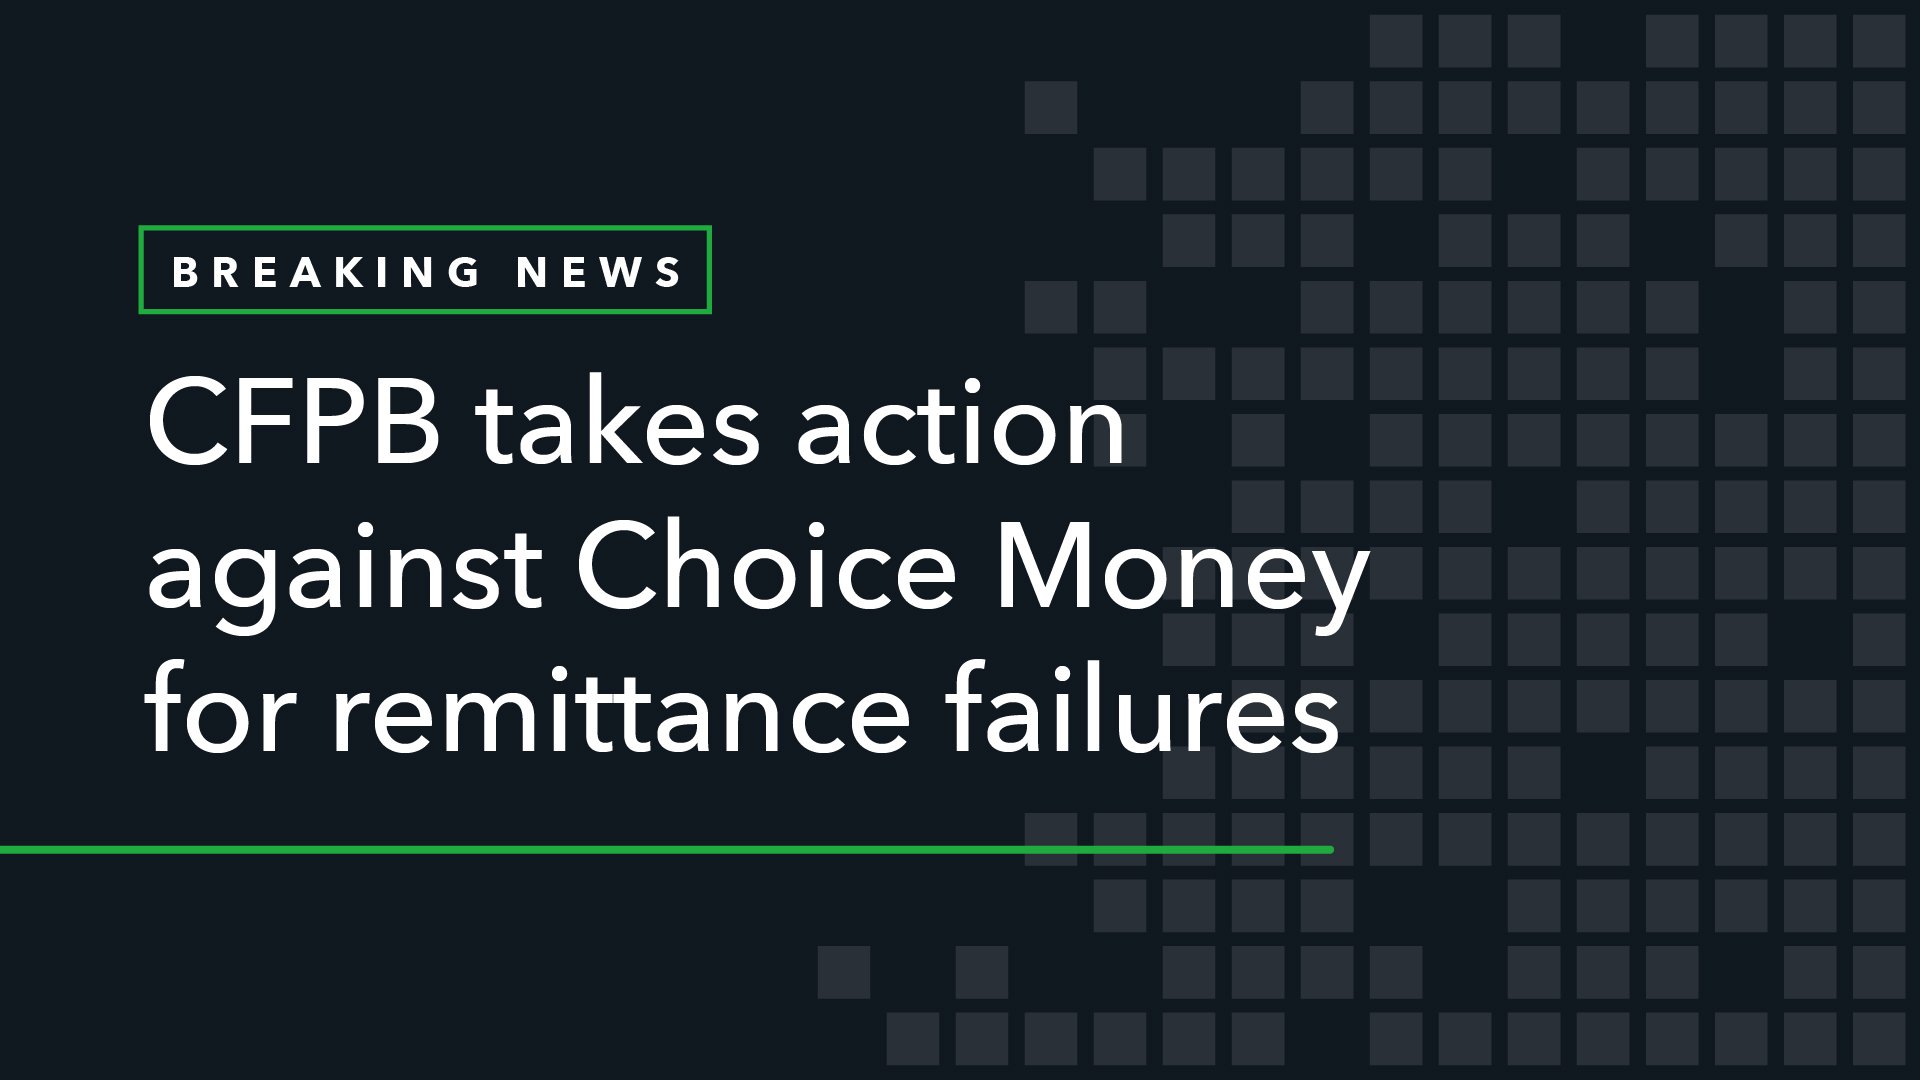 CFPB Takes Action Against Choice Money for Remittance Failures